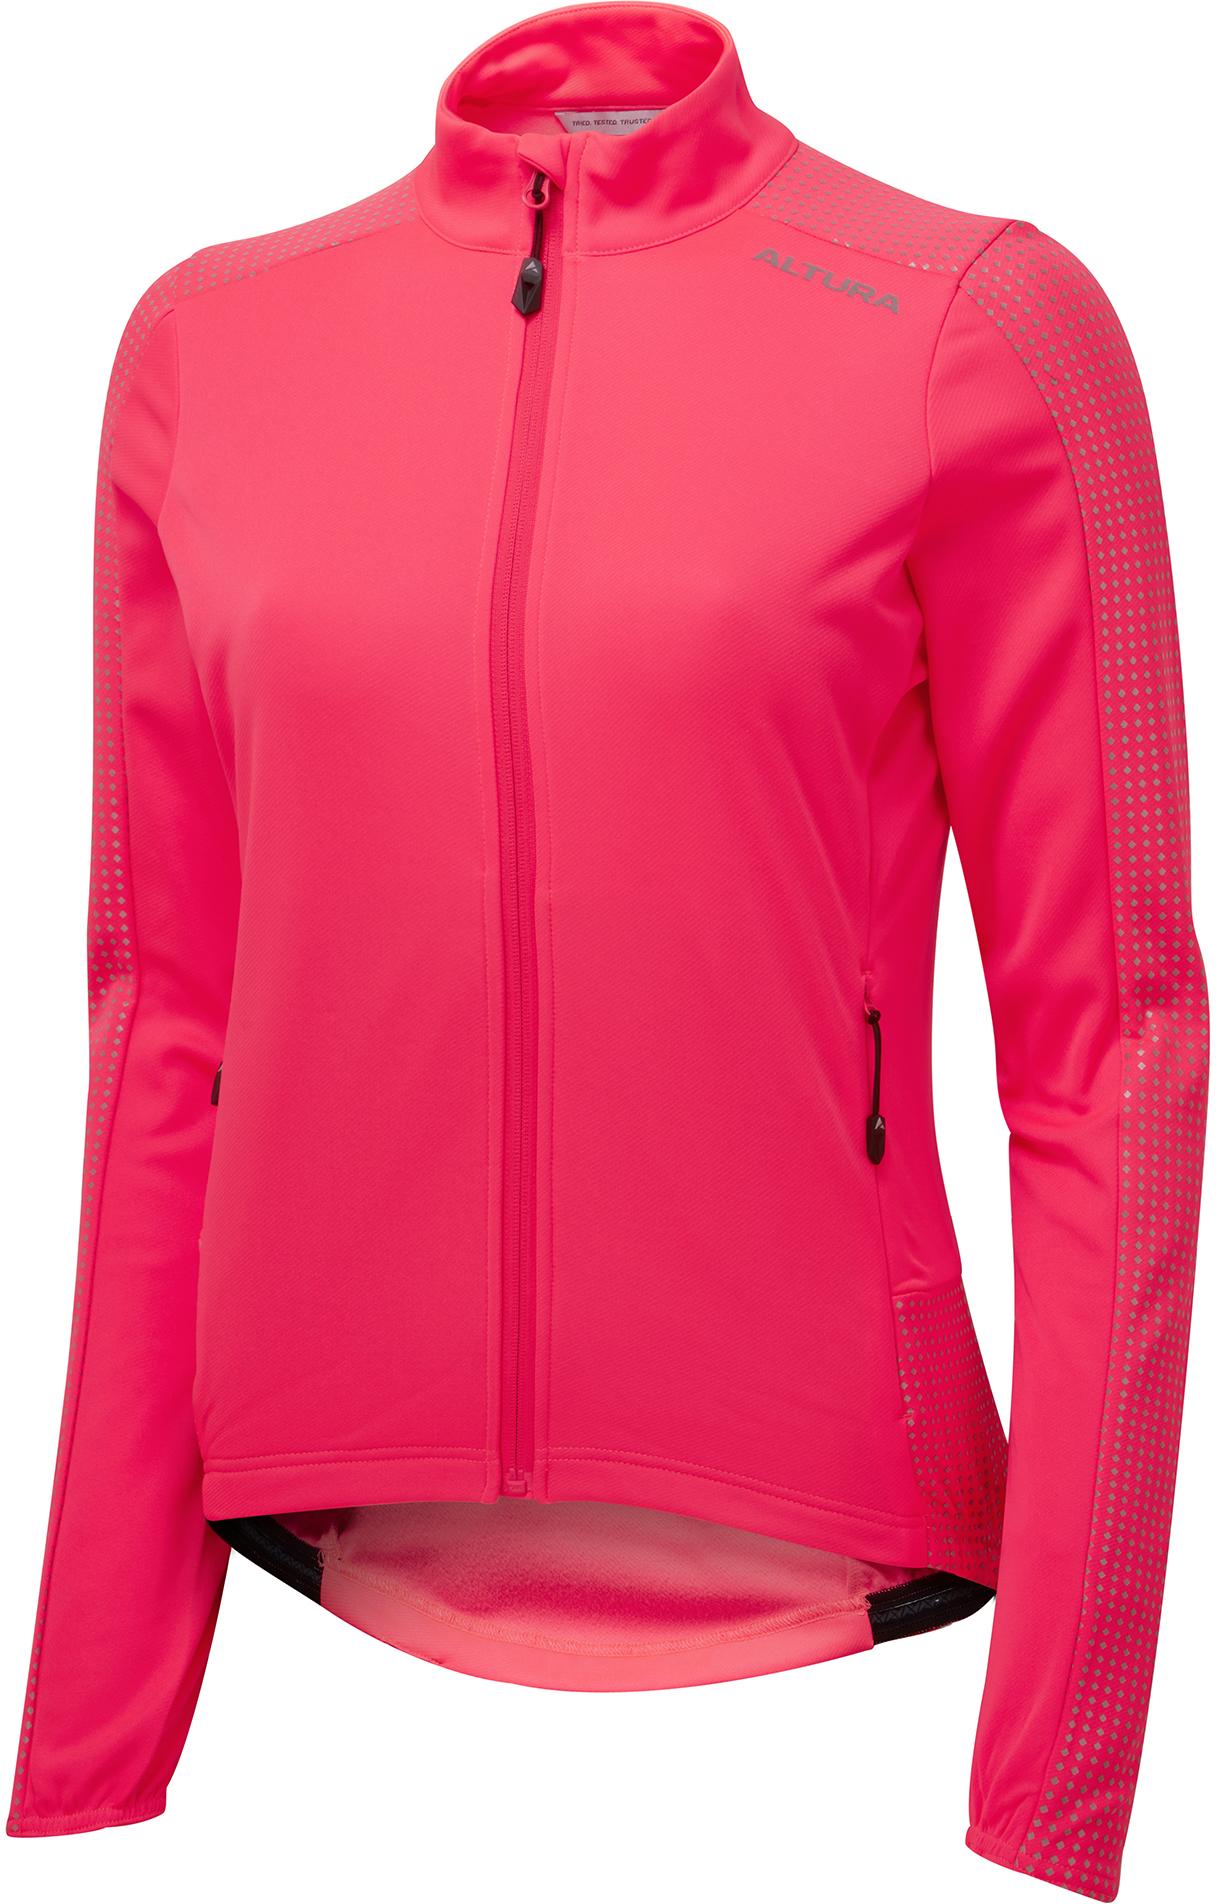 Altura Nightvision Women's Long Sleeve Jersey Pink 10